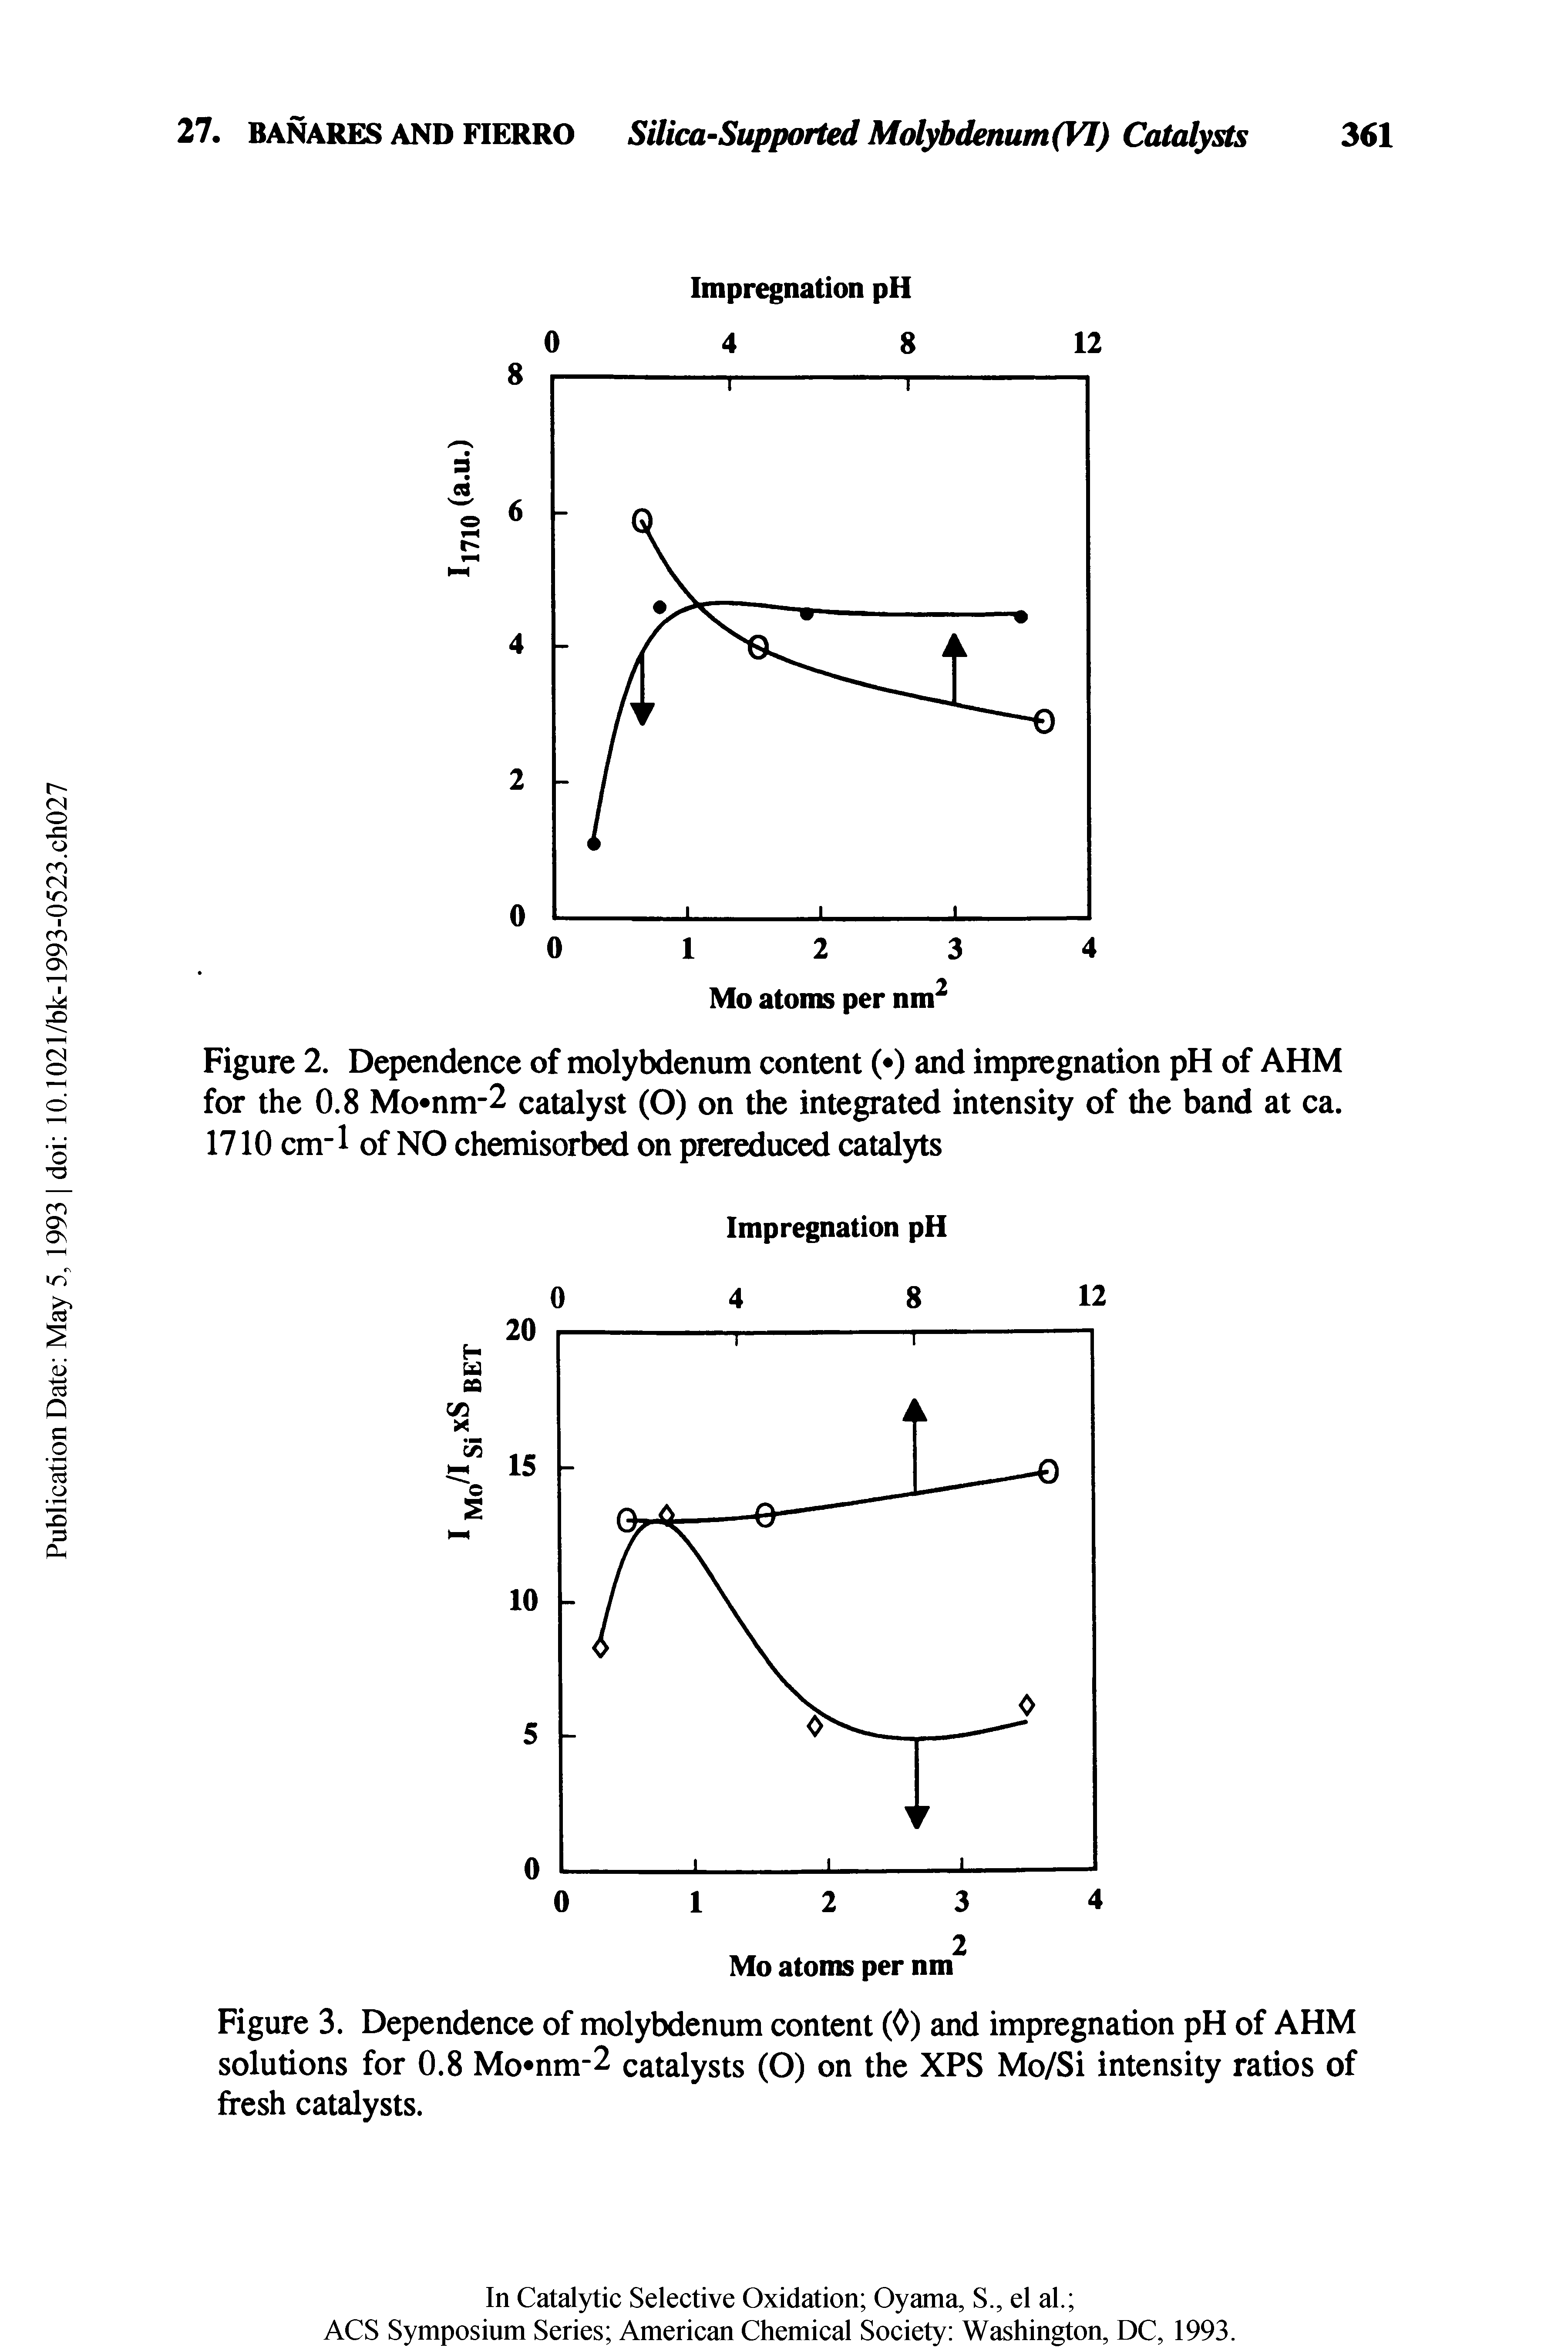 Figure 2. Dependence of molybdenum content ( ) and impregnation pH of AHM for the 0.8 Mo nm-2 catalyst (O) on the integrated intensity of the band at ca. 1710 cm-1 of NO chemisorbed on prereduced catalyts...